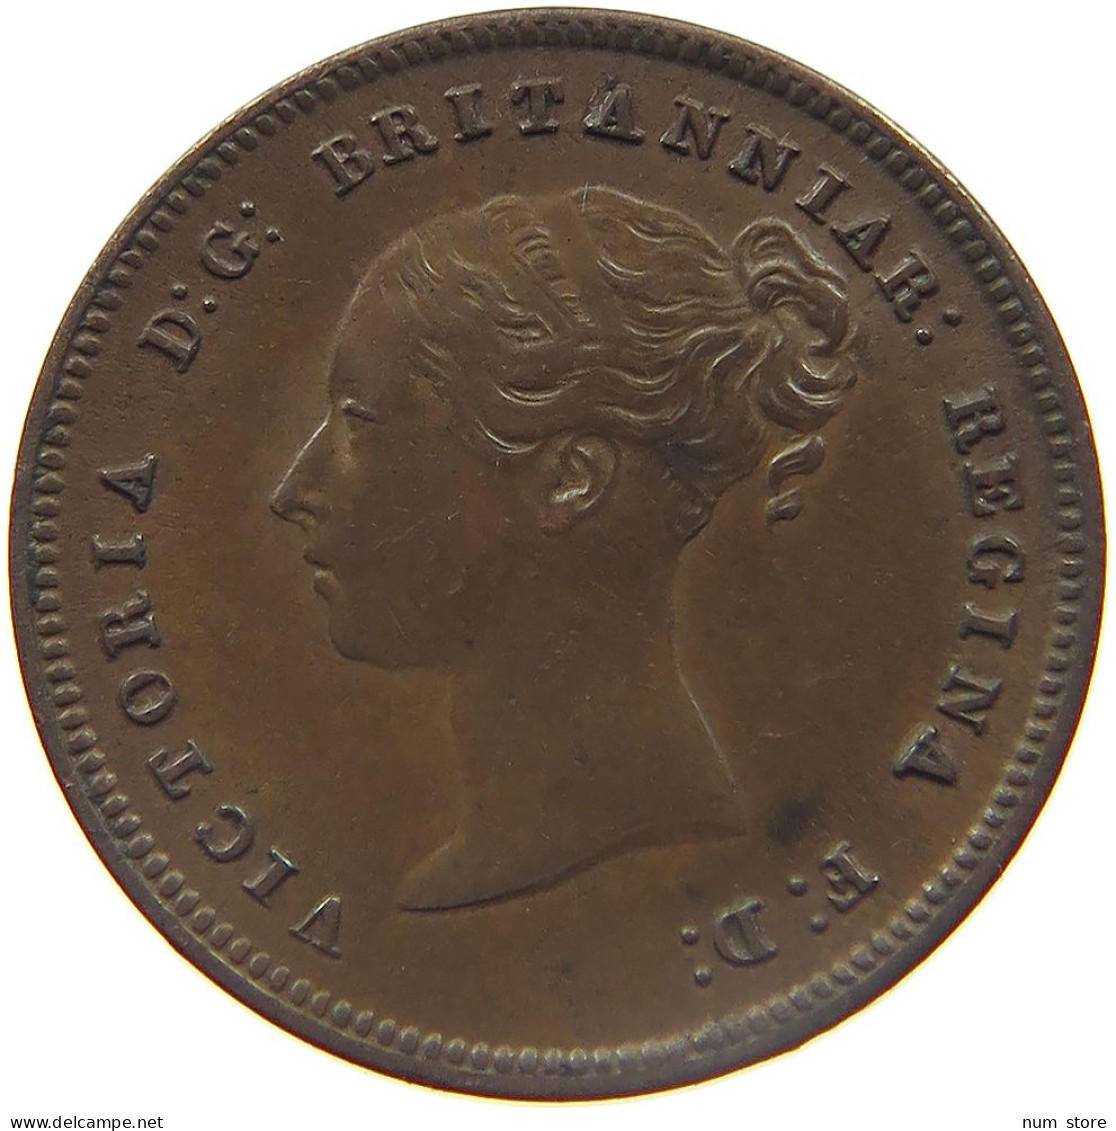 GREAT BRITAIN HALF FARTHING 1844 VICTORIA 1837-1901 #MA 022989 - A. 1/4 - 1/3 - 1/2 Farthing